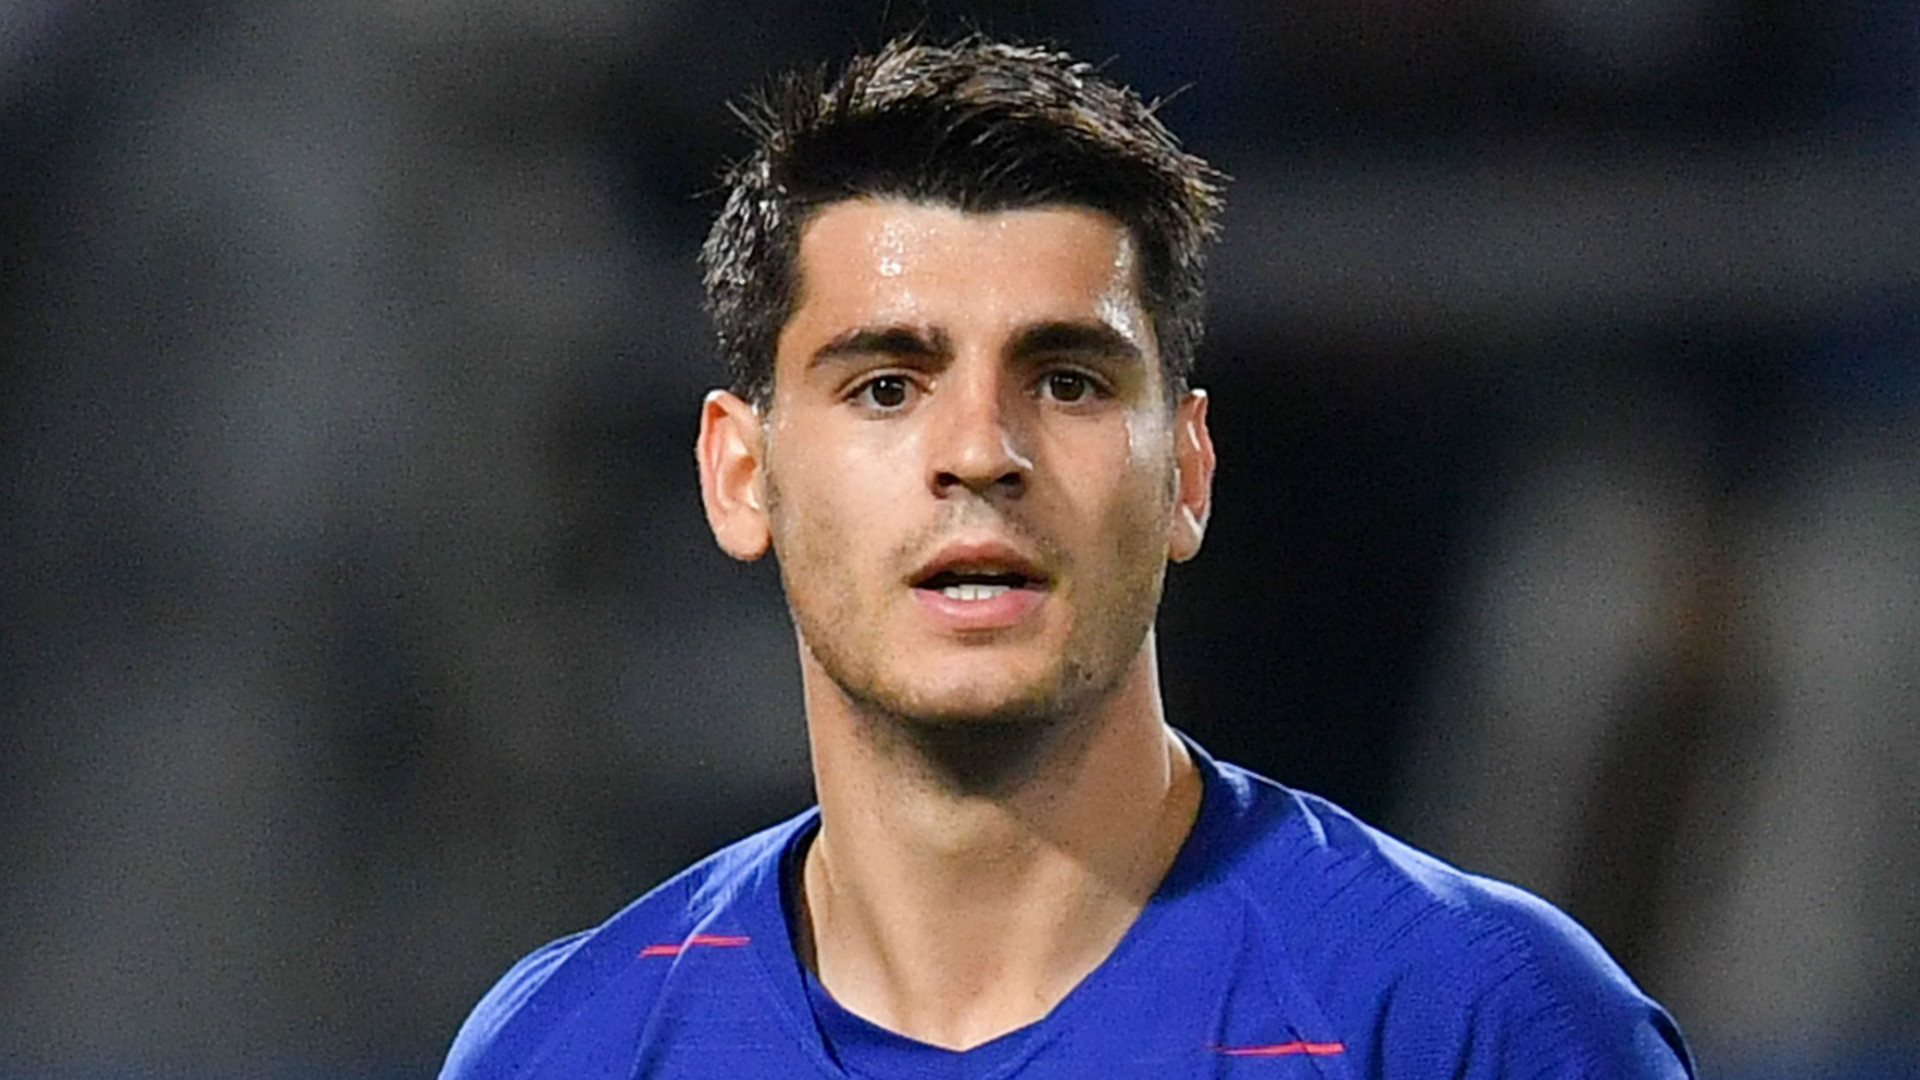  Alvaro Morata looking frustrated during a match, seemingly in response to criticism of his performance.